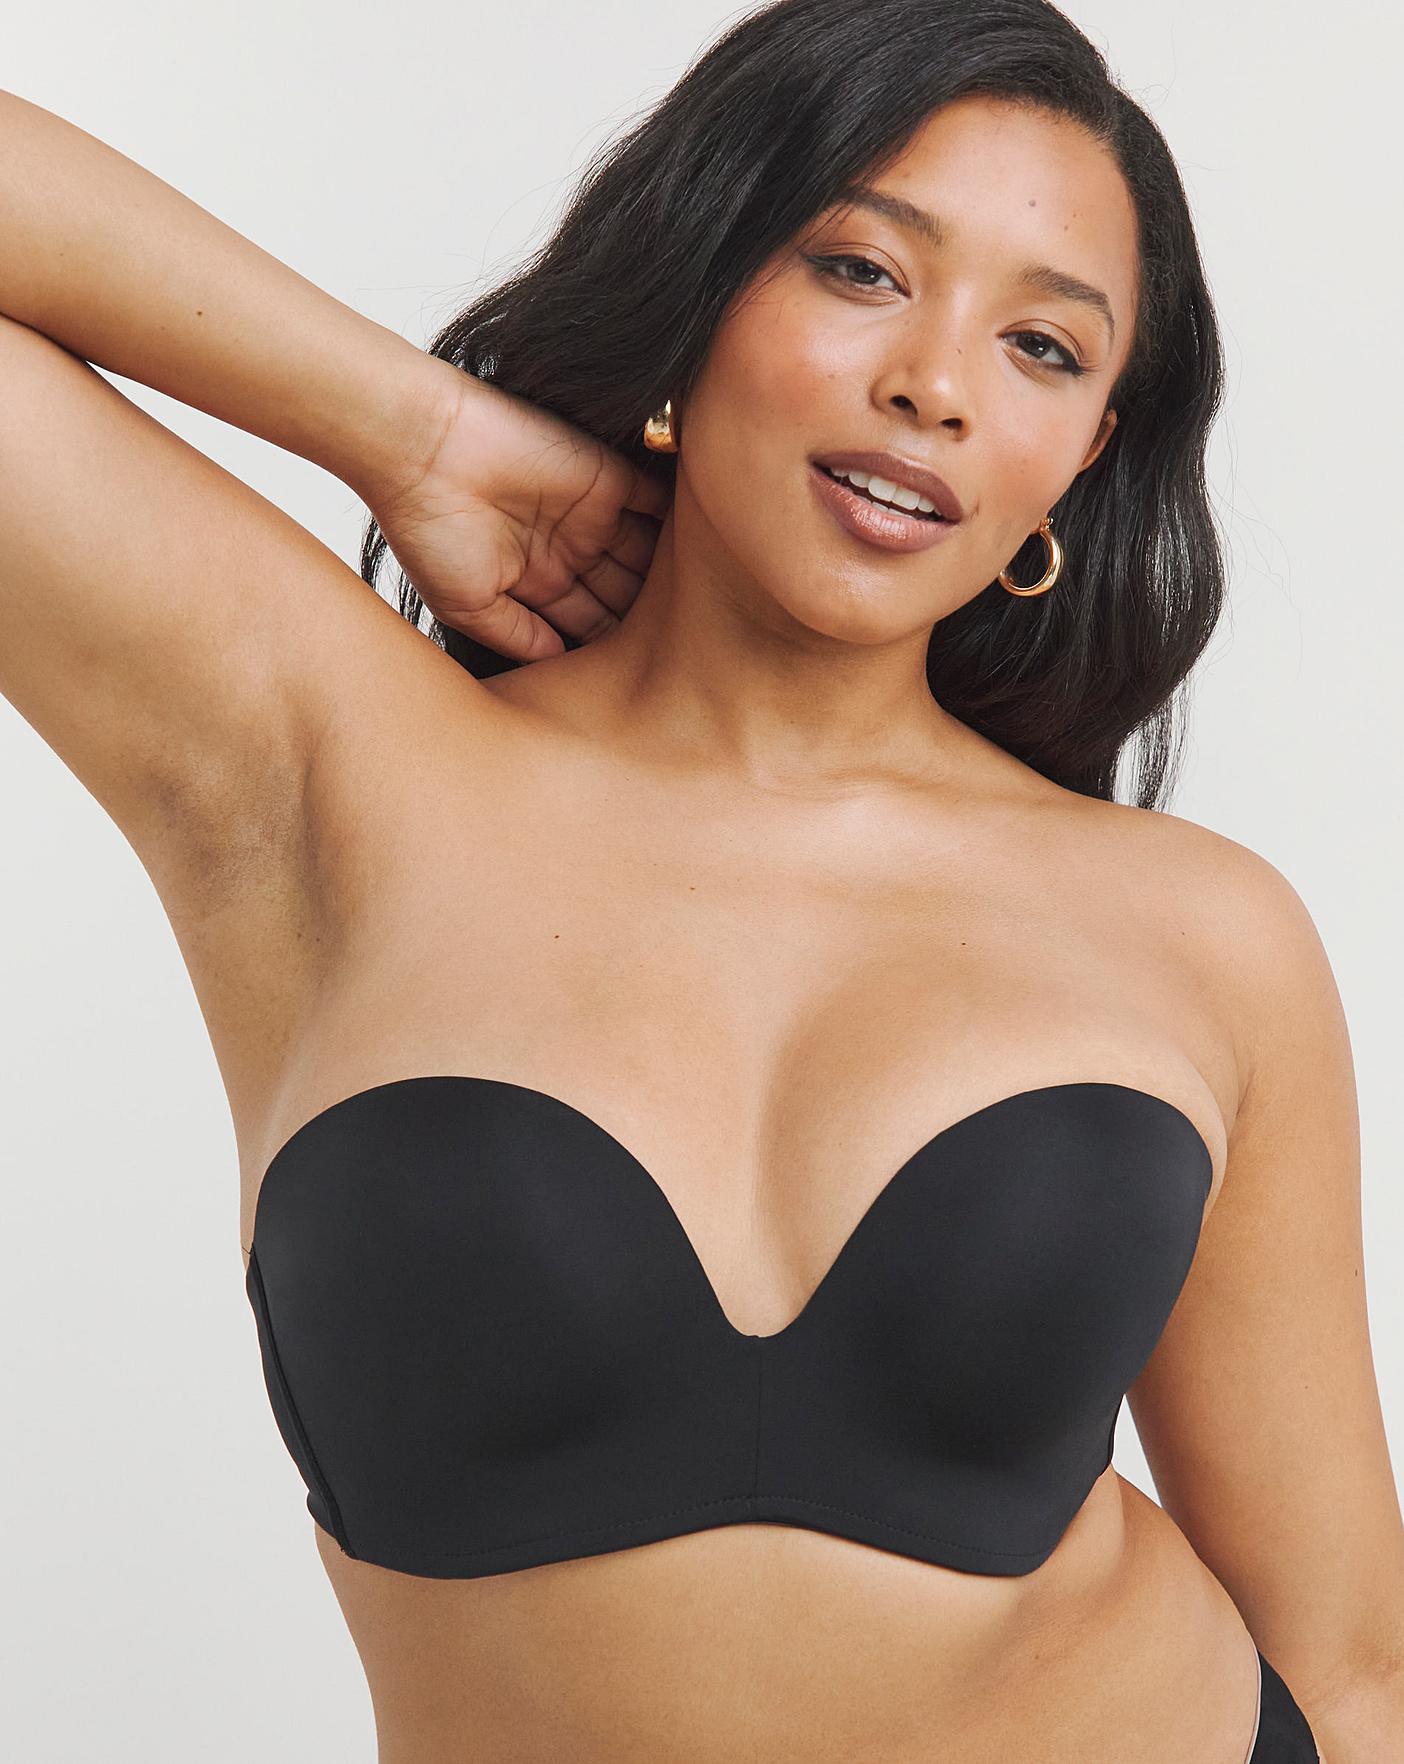 Wonderbra - Wear that low back outfit with confidence with our